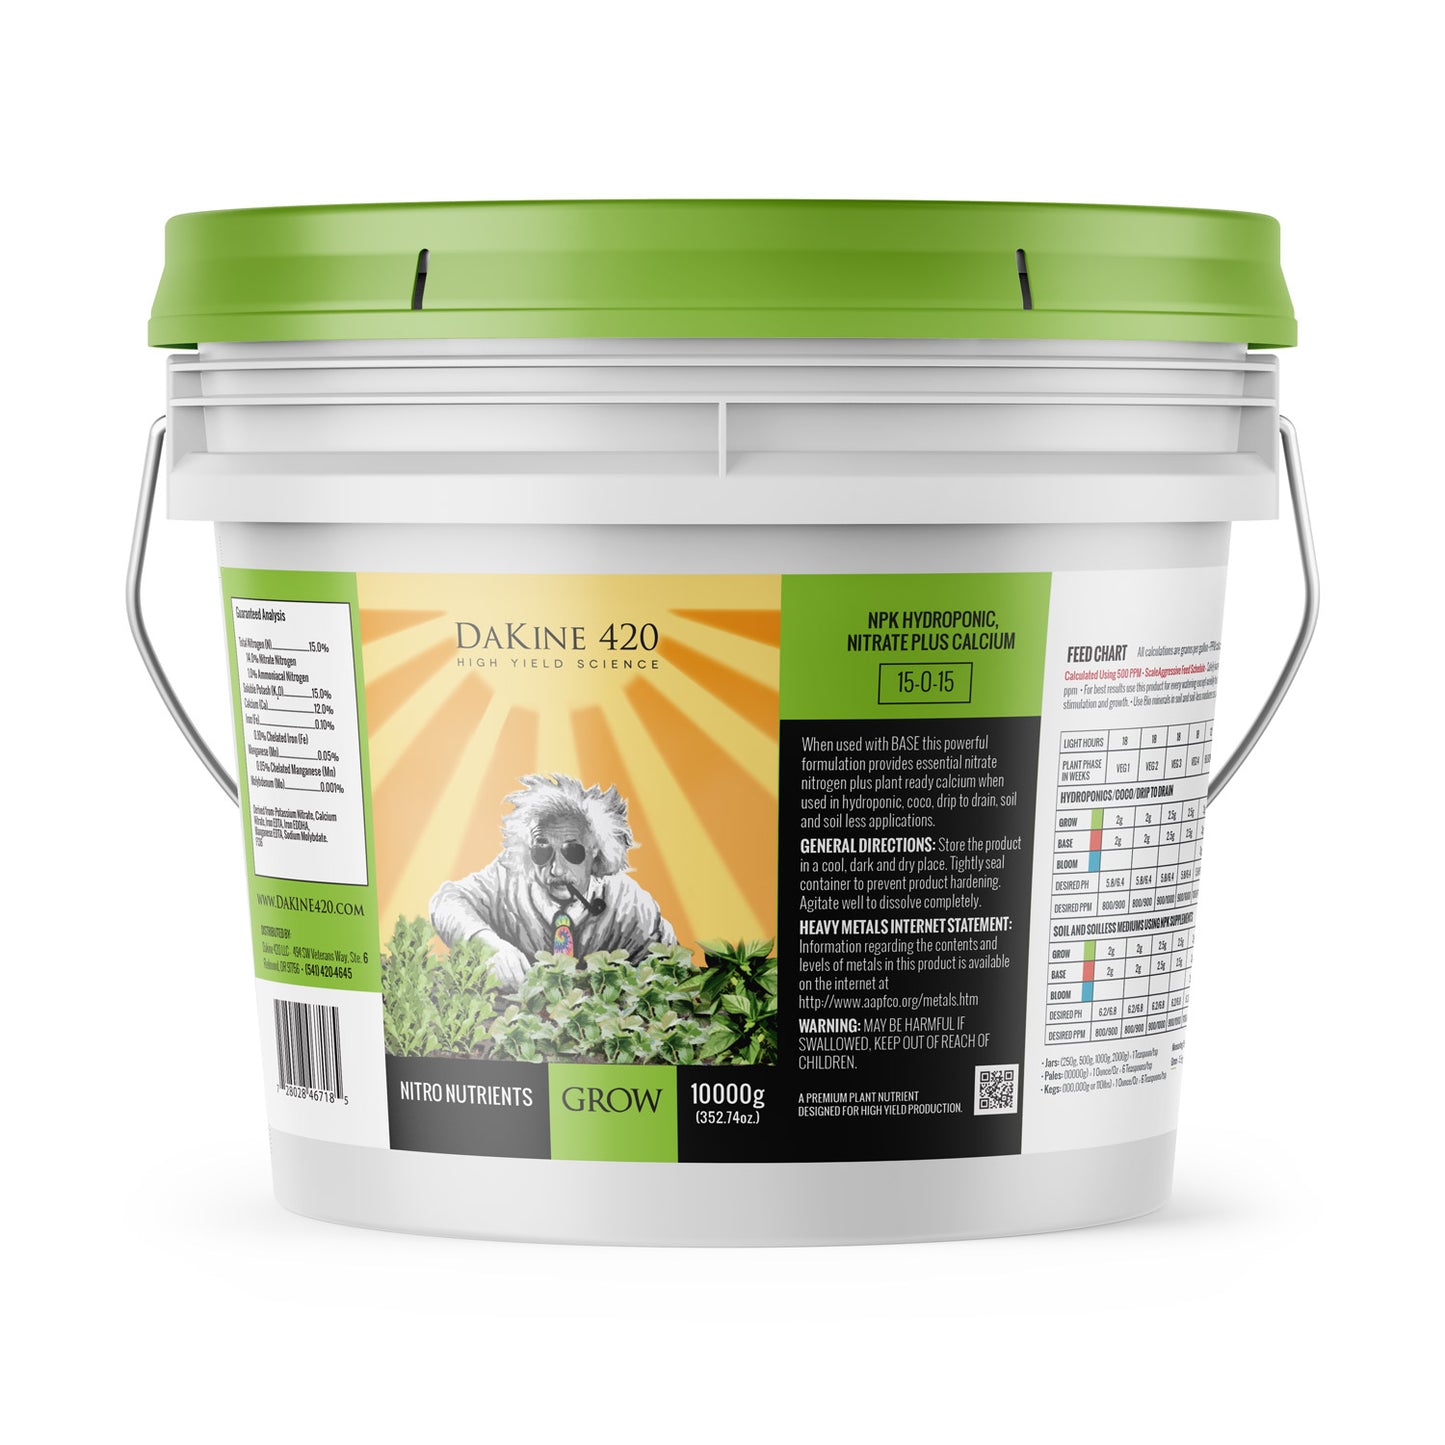 10,000g Nitro Nutrients GROW does what the name suggests, to give you the biggest, greenest, most potent cannabis plants on the planet.